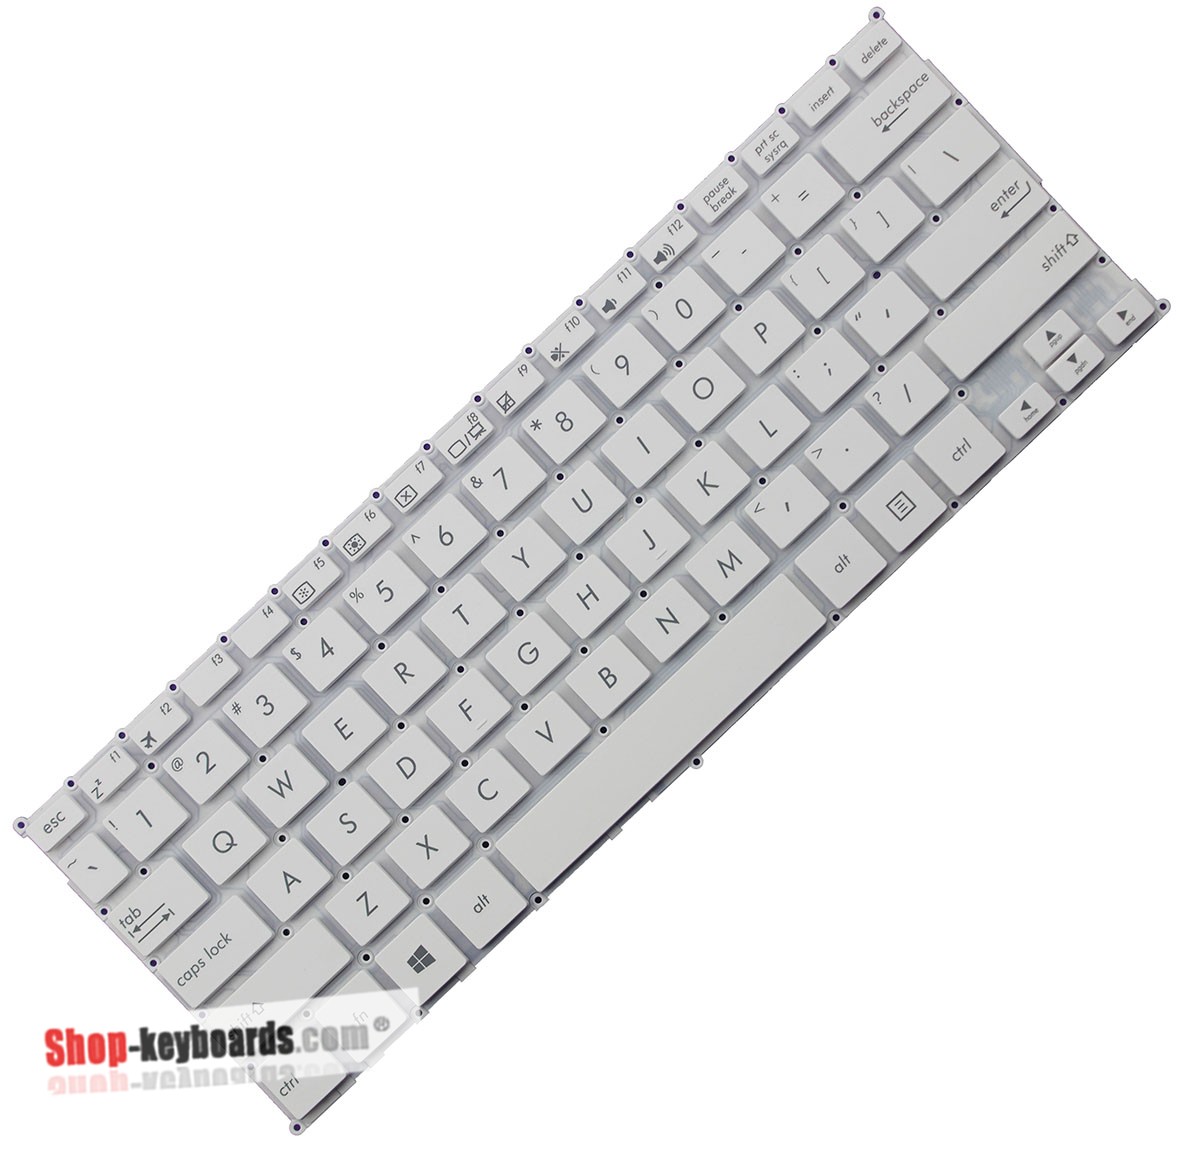 Asus 0KNL0-1122LA00 Keyboard replacement